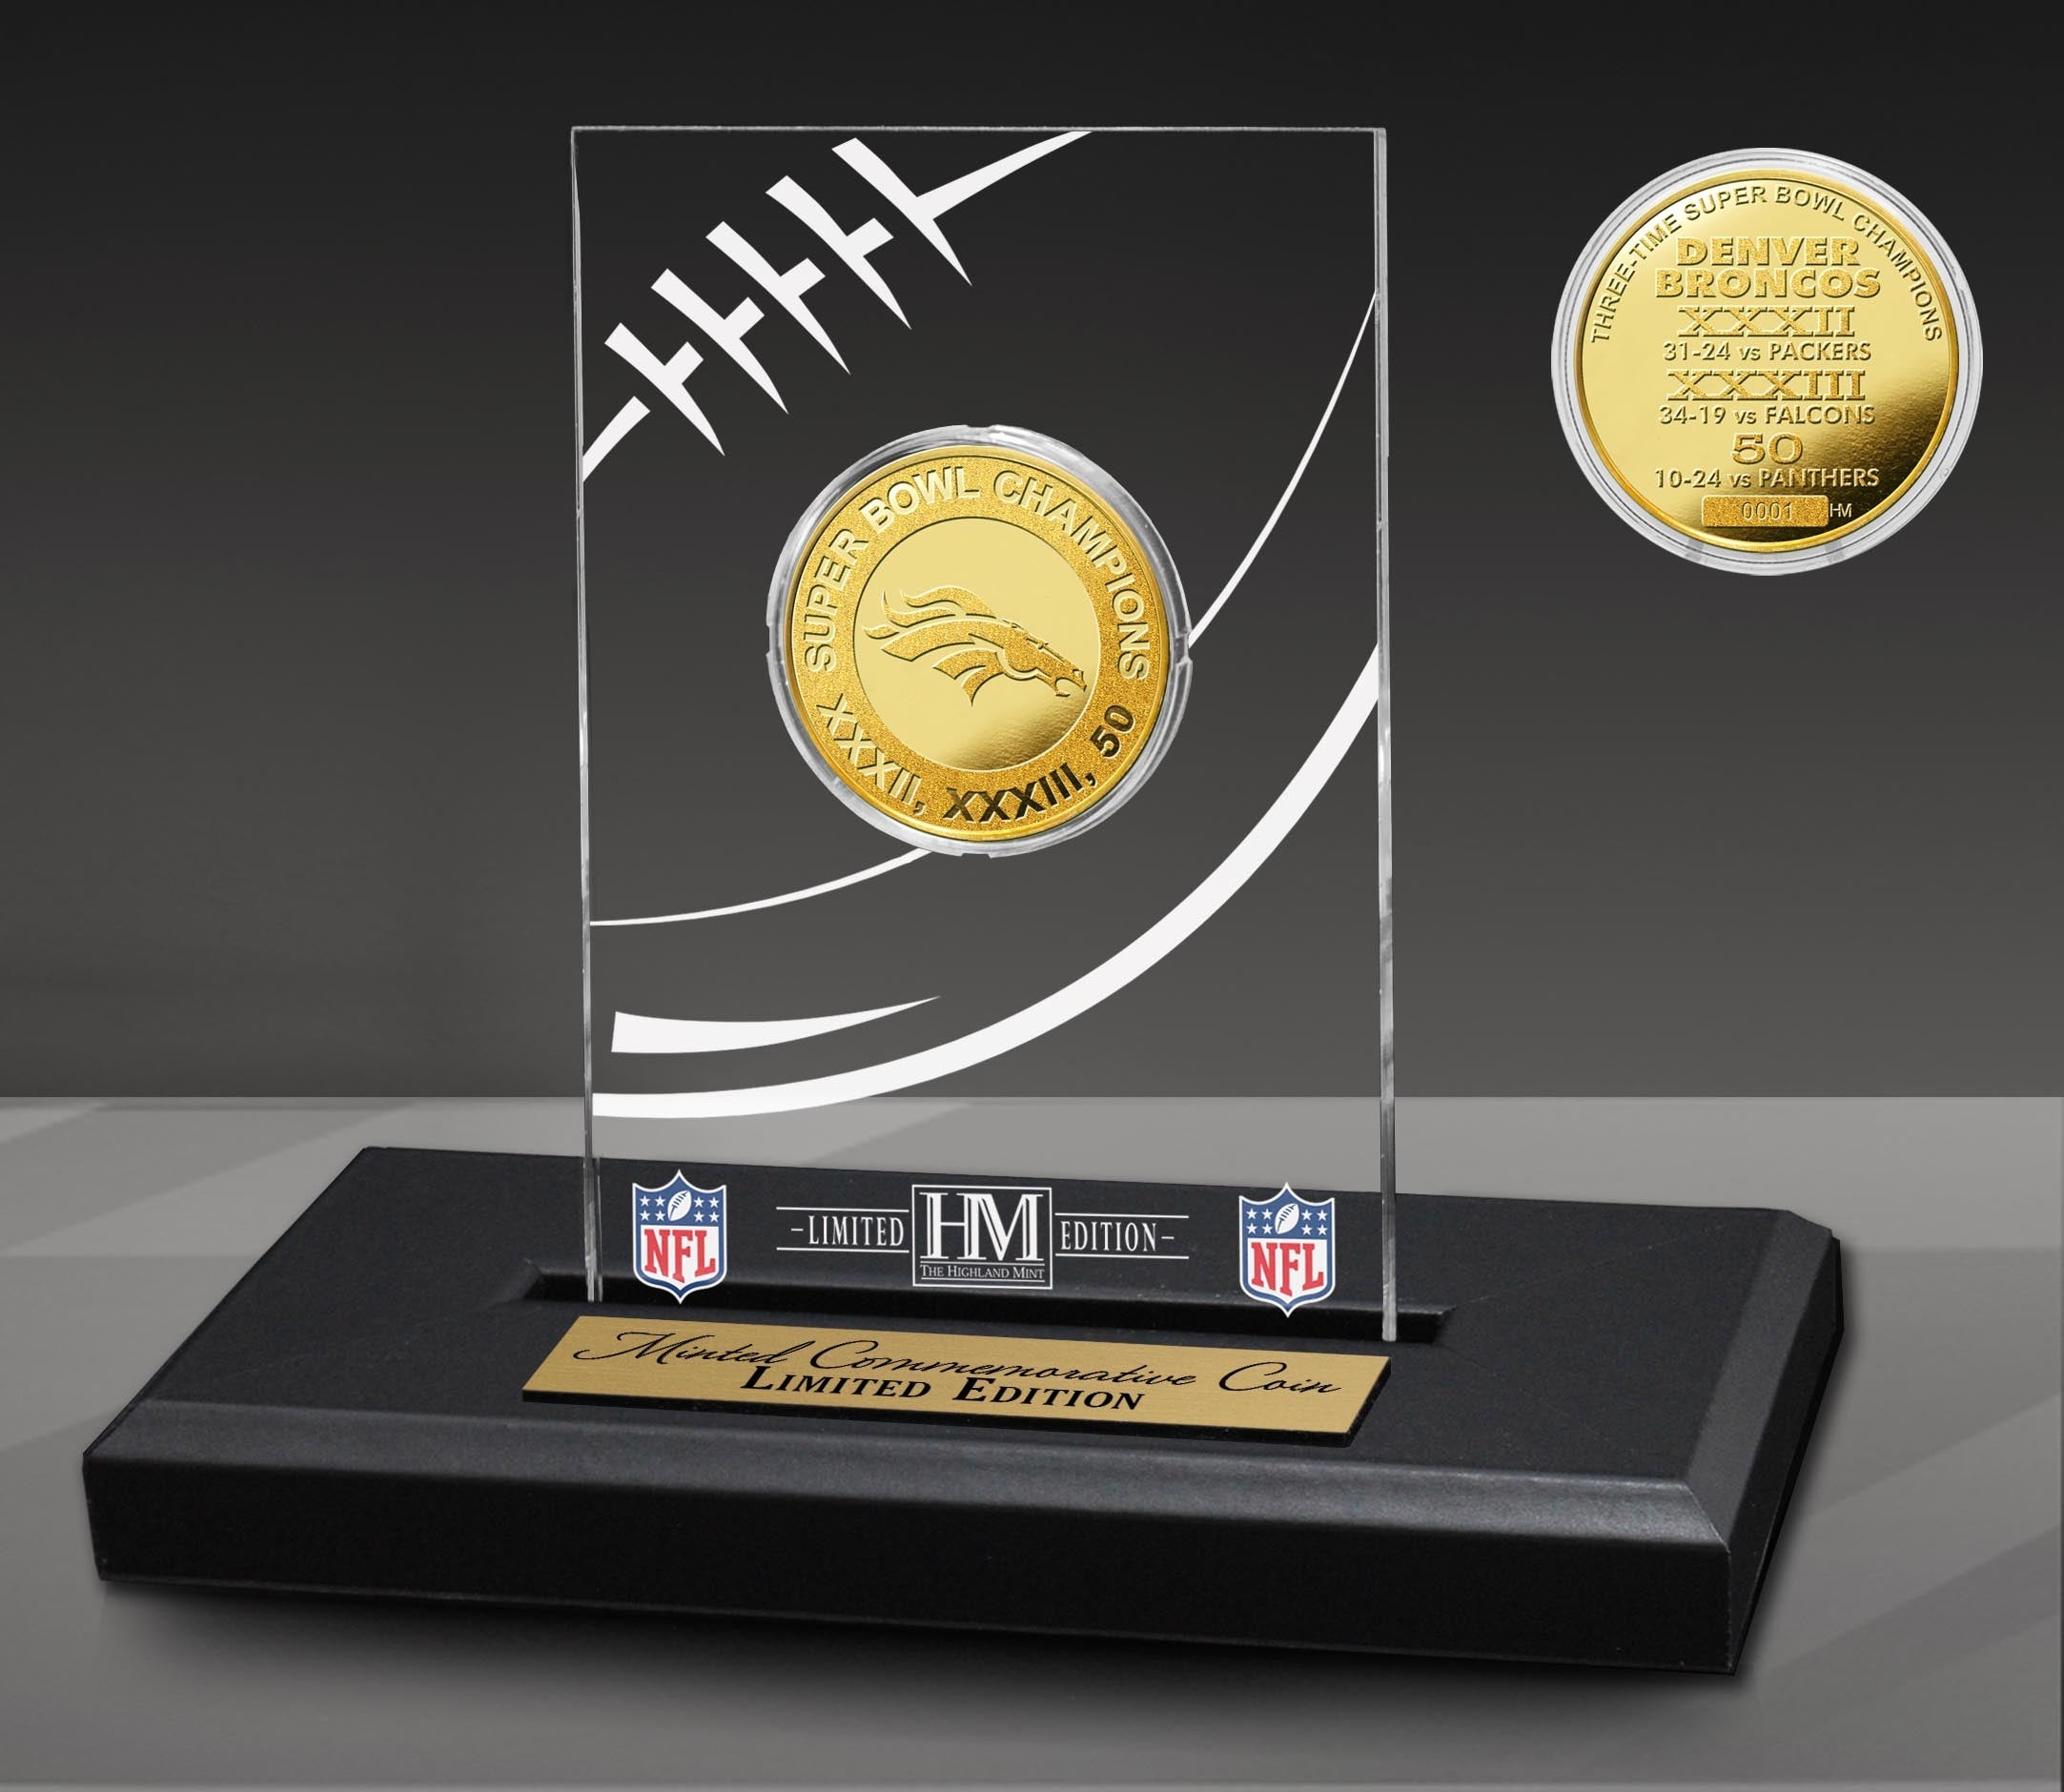 Denver Broncos 3X Super Bowl Champions Gold Coin Arcylic Display